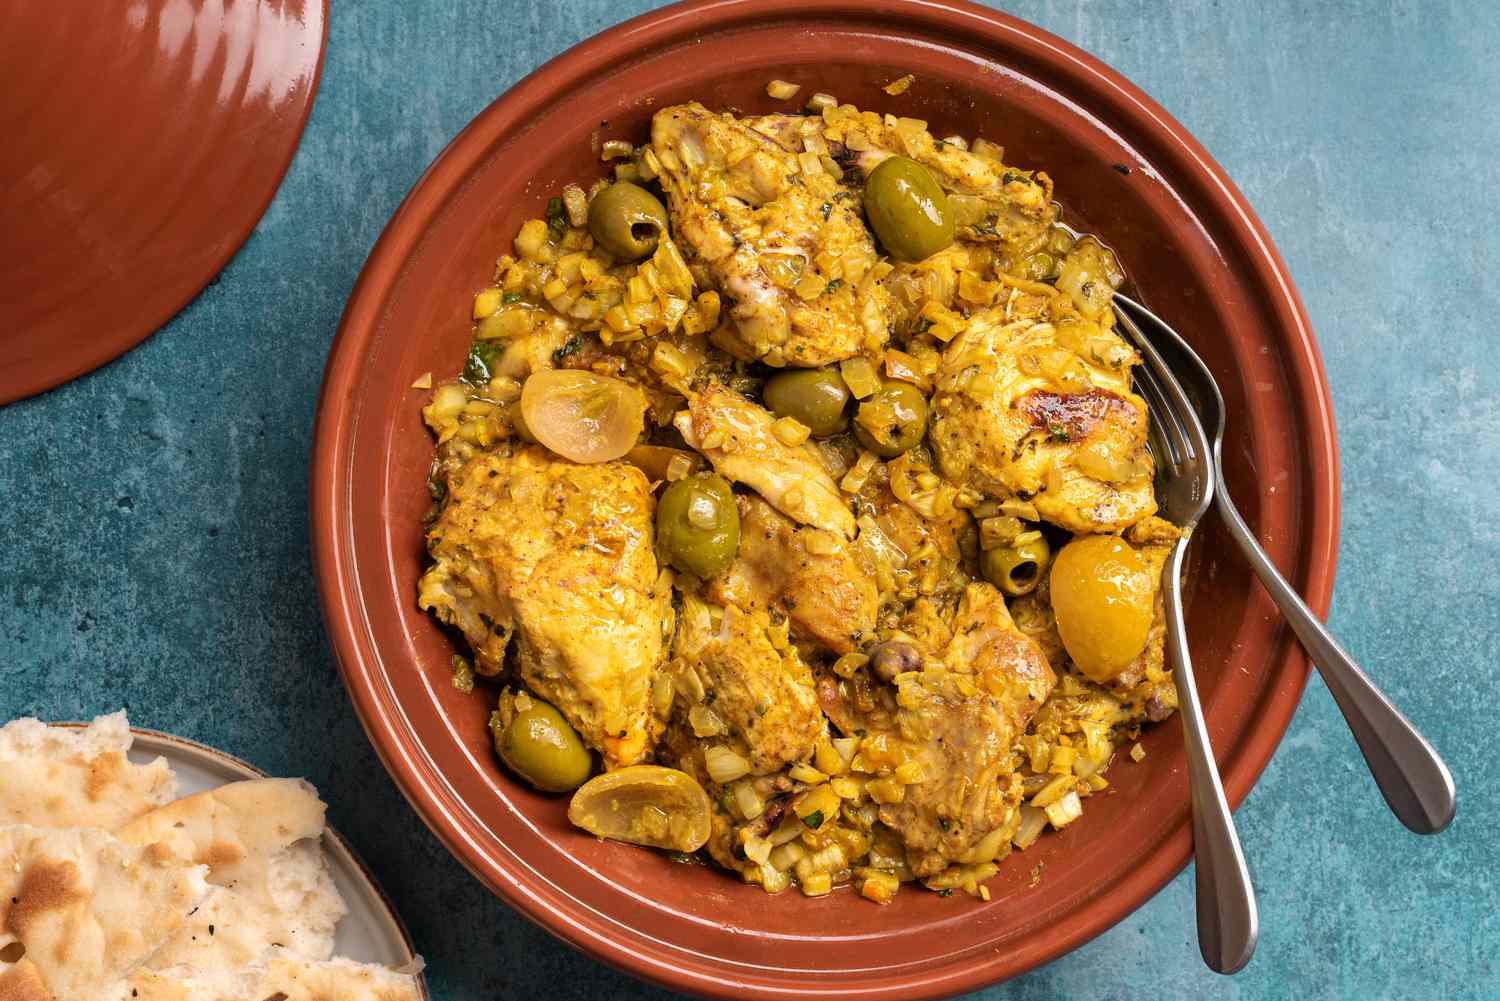 35 interesting facts about Tagine